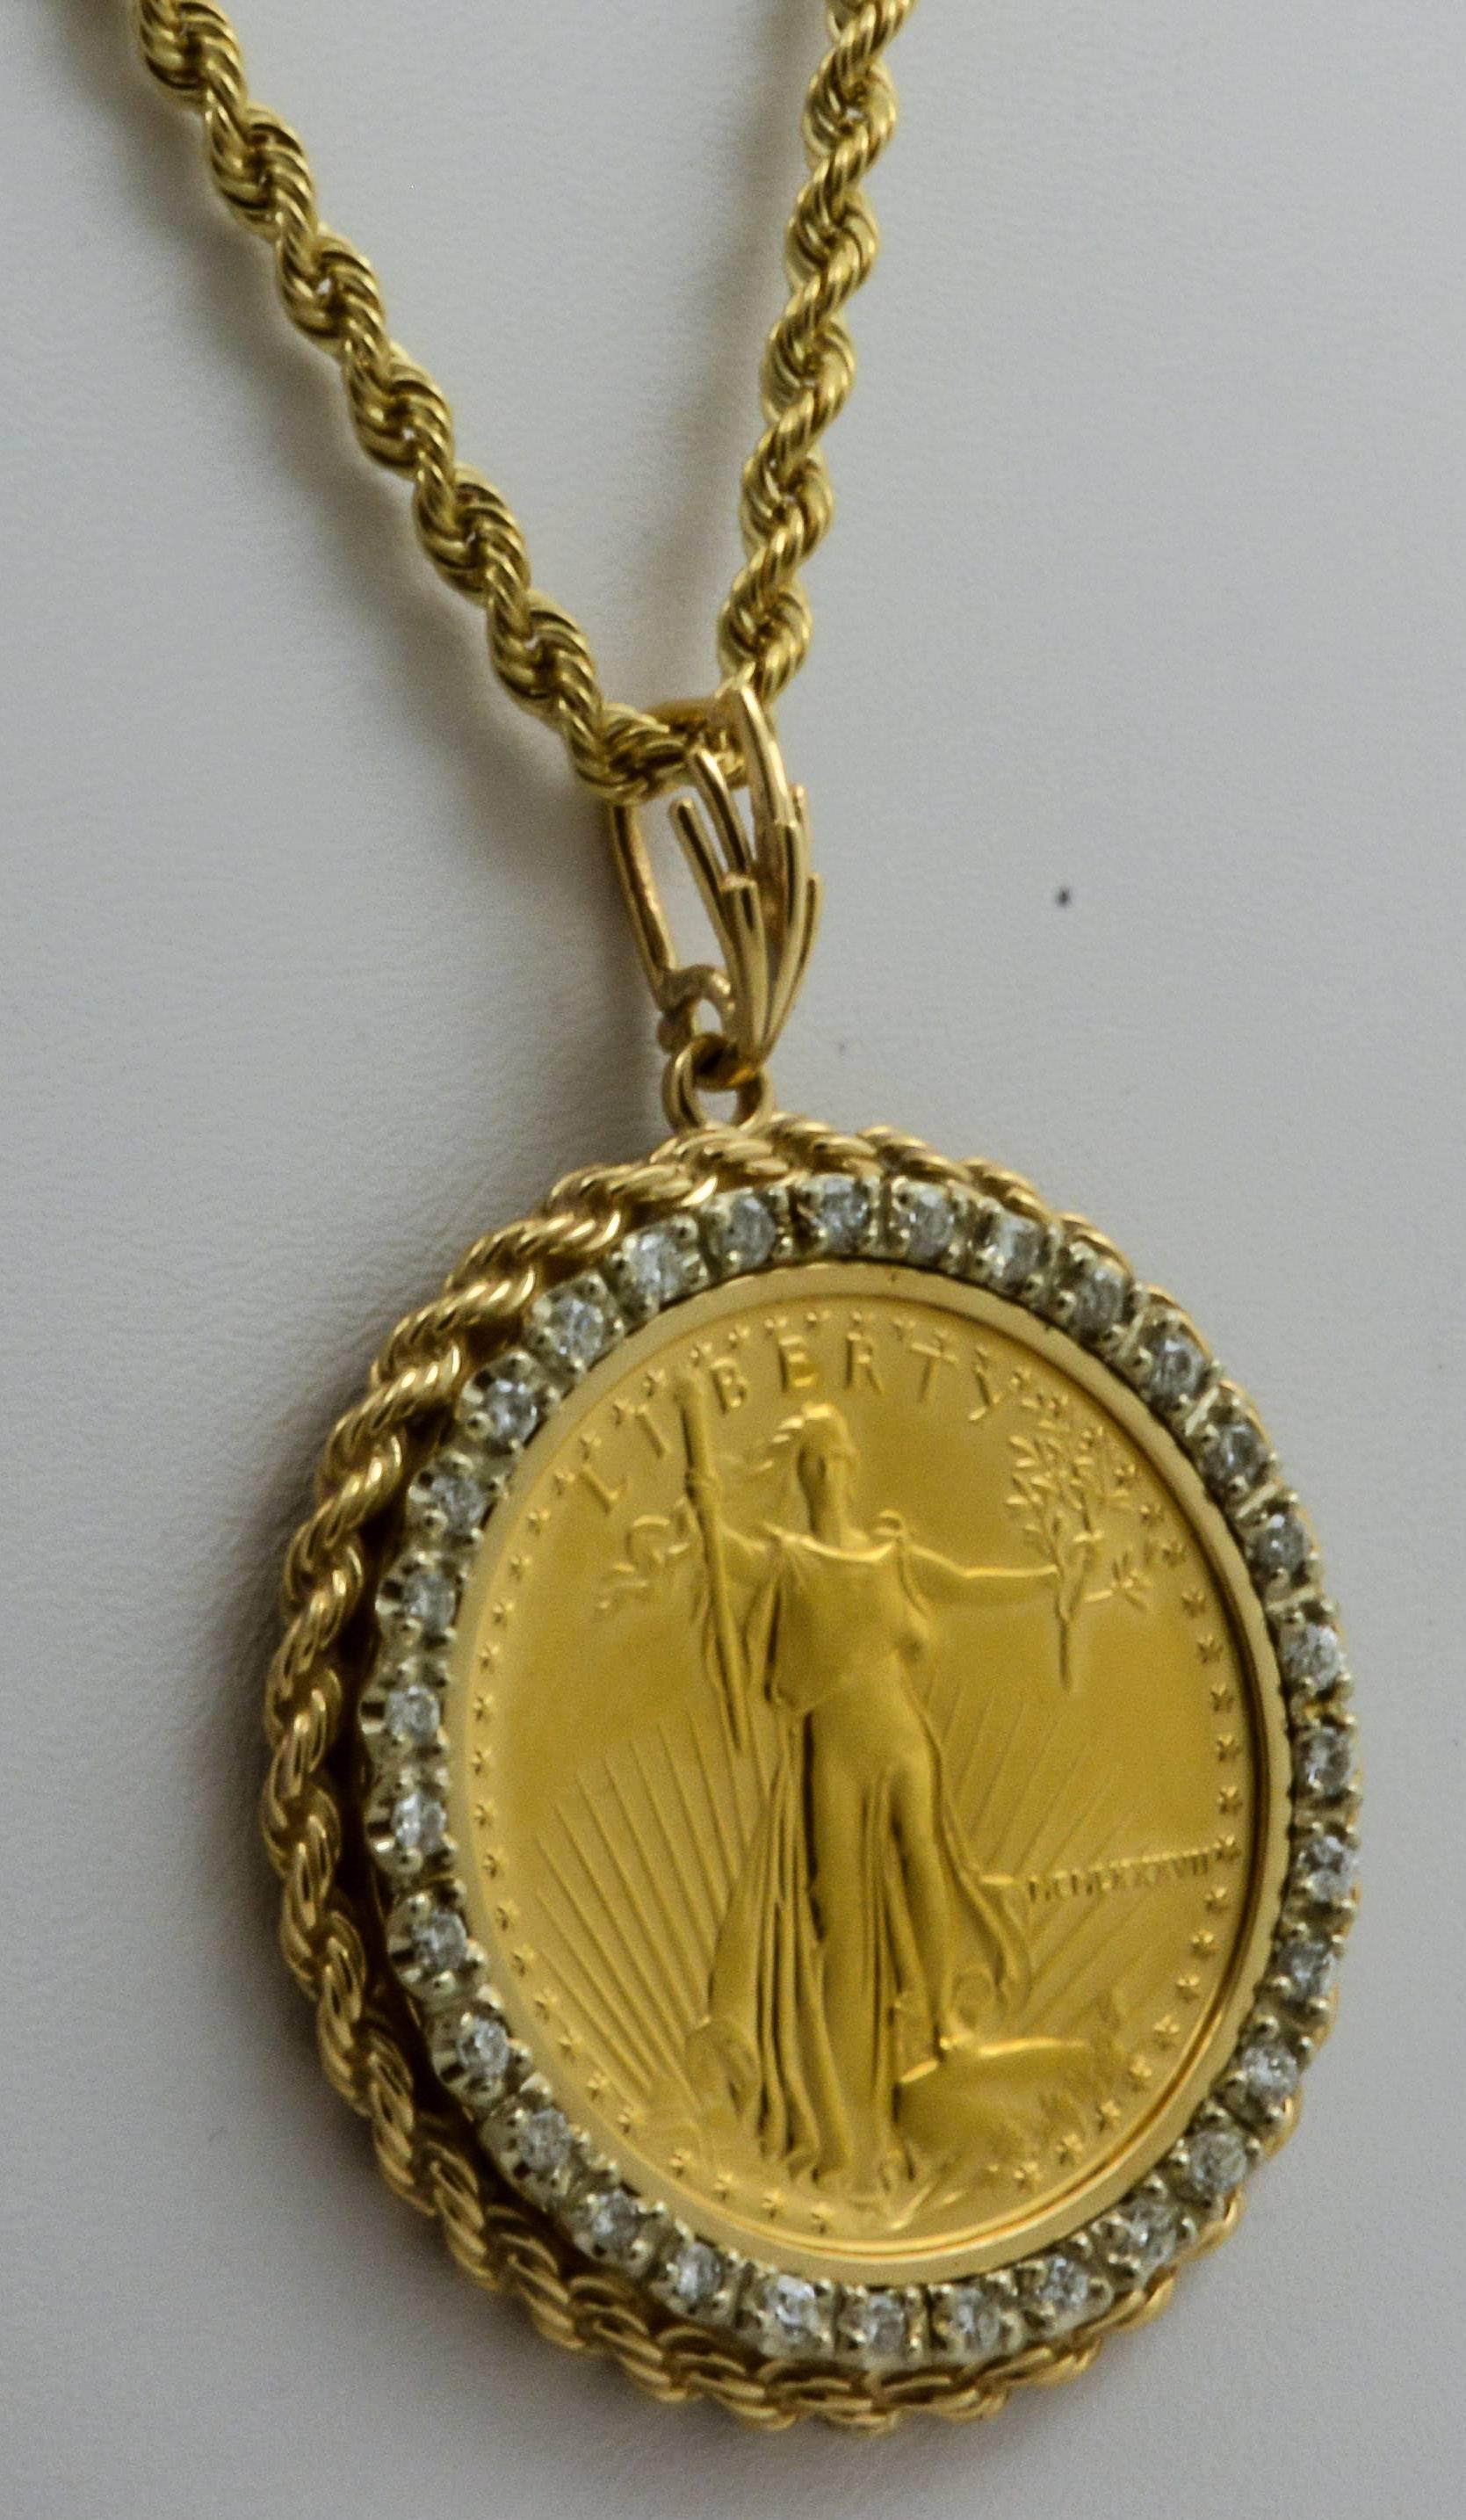 The $50 Liberty United States gold coin is commemorated with a bezel of thirty-one round brilliant cut diamonds (approximate combined weight 1.50 carats, clarity SI2 color G-H). An intricate rope border frames the piece and attaches to a 22in, 14kt